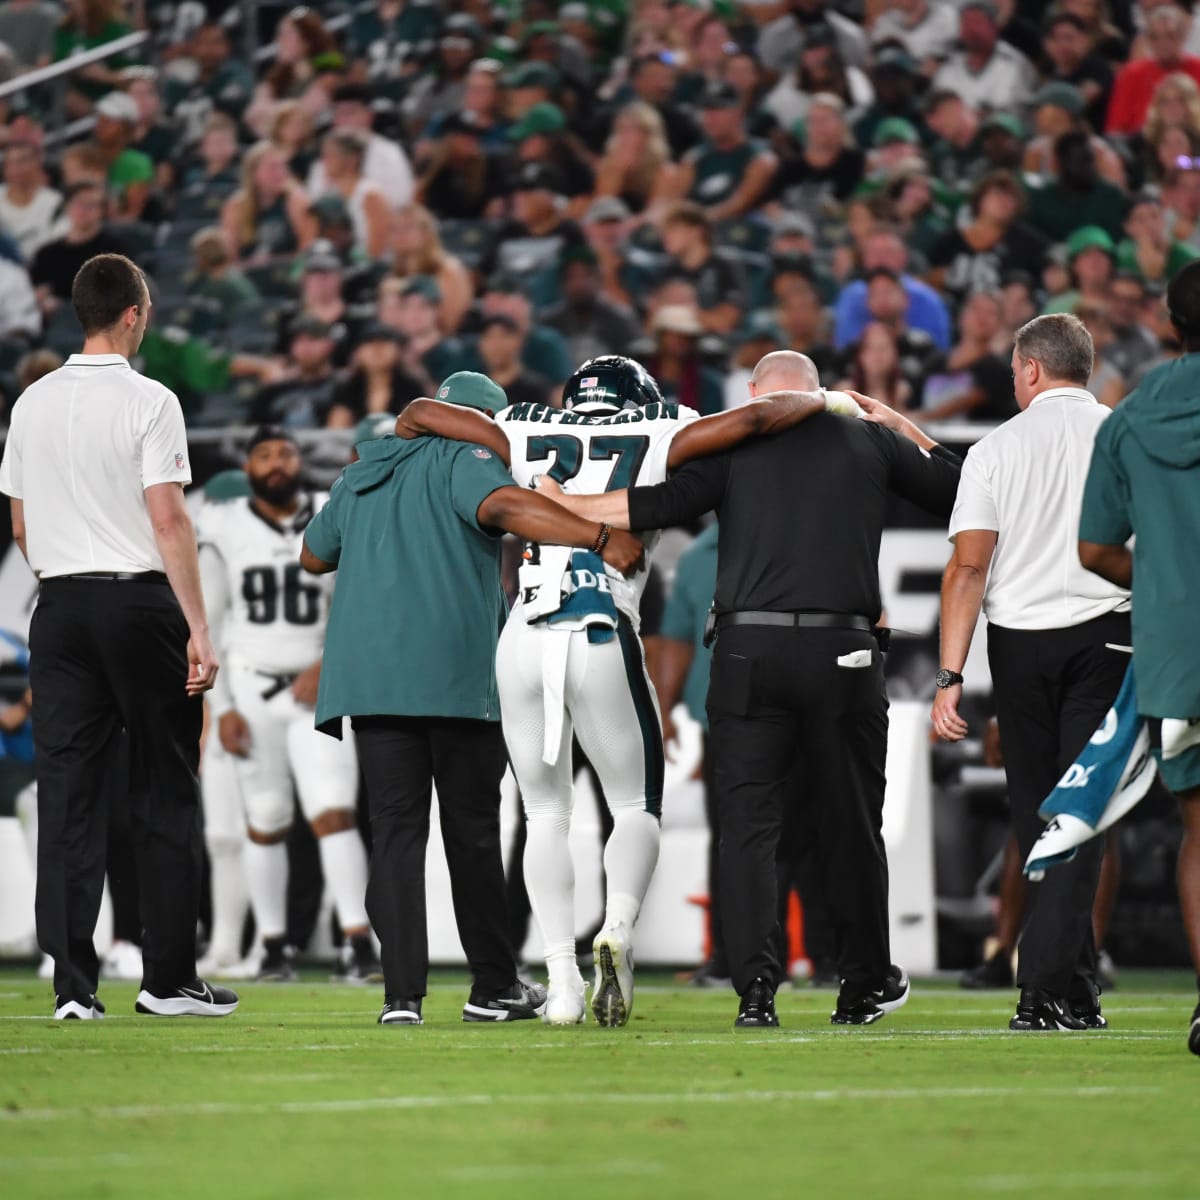 Philadelphia Eagles players carted off after suffering neck injuries have  'movement in all extremities'